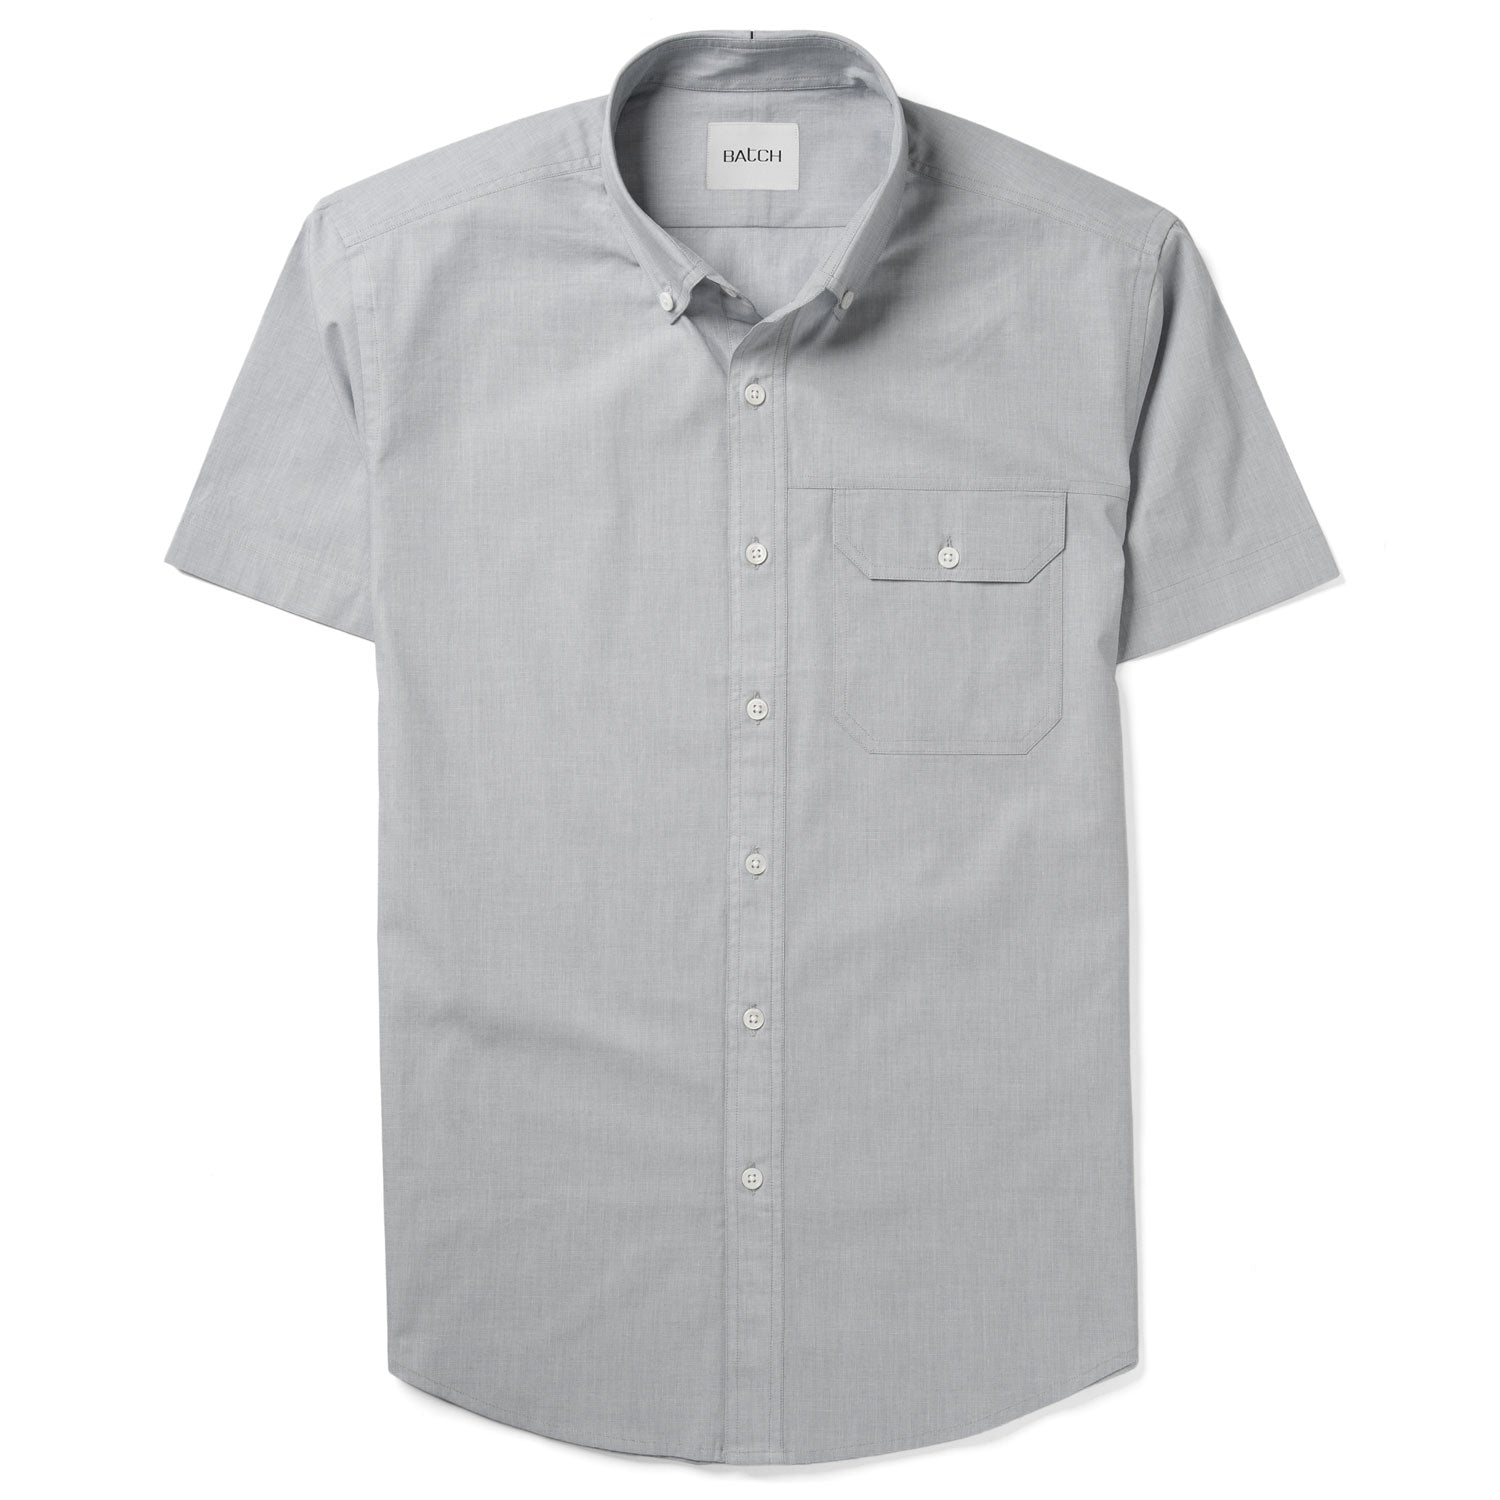 Builder Short Sleeve Casual Shirt – Aluminum Gray Cotton End-on-end